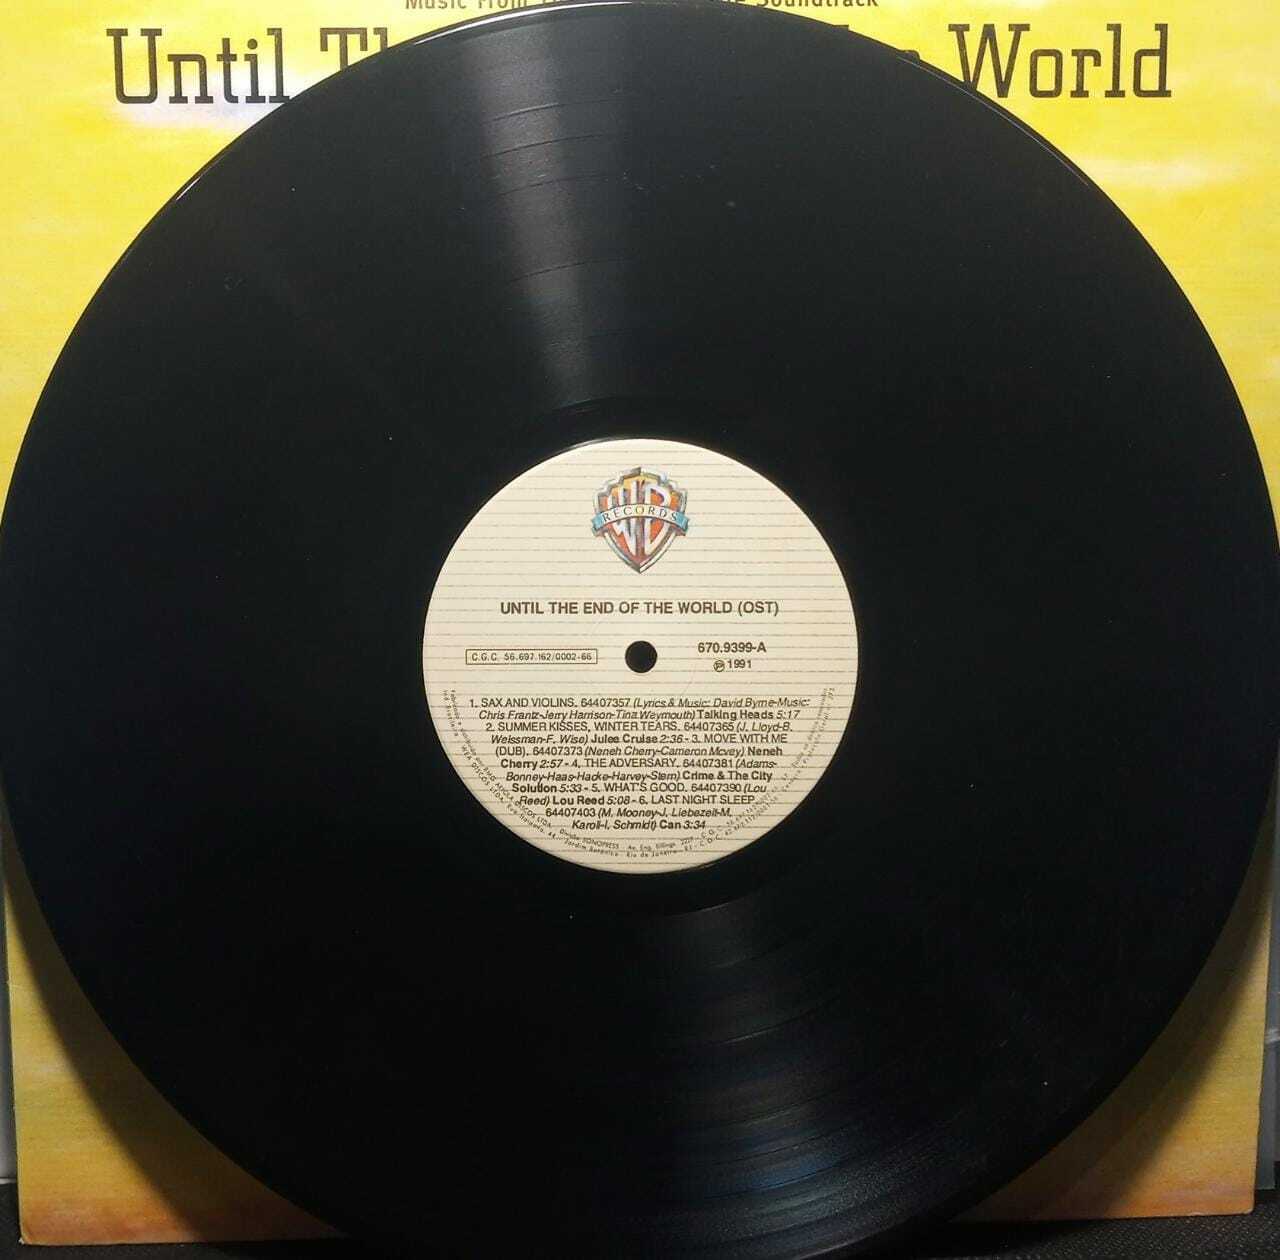 Vinil - Until the End of the World - Music from the Motion Picture Soundtrack